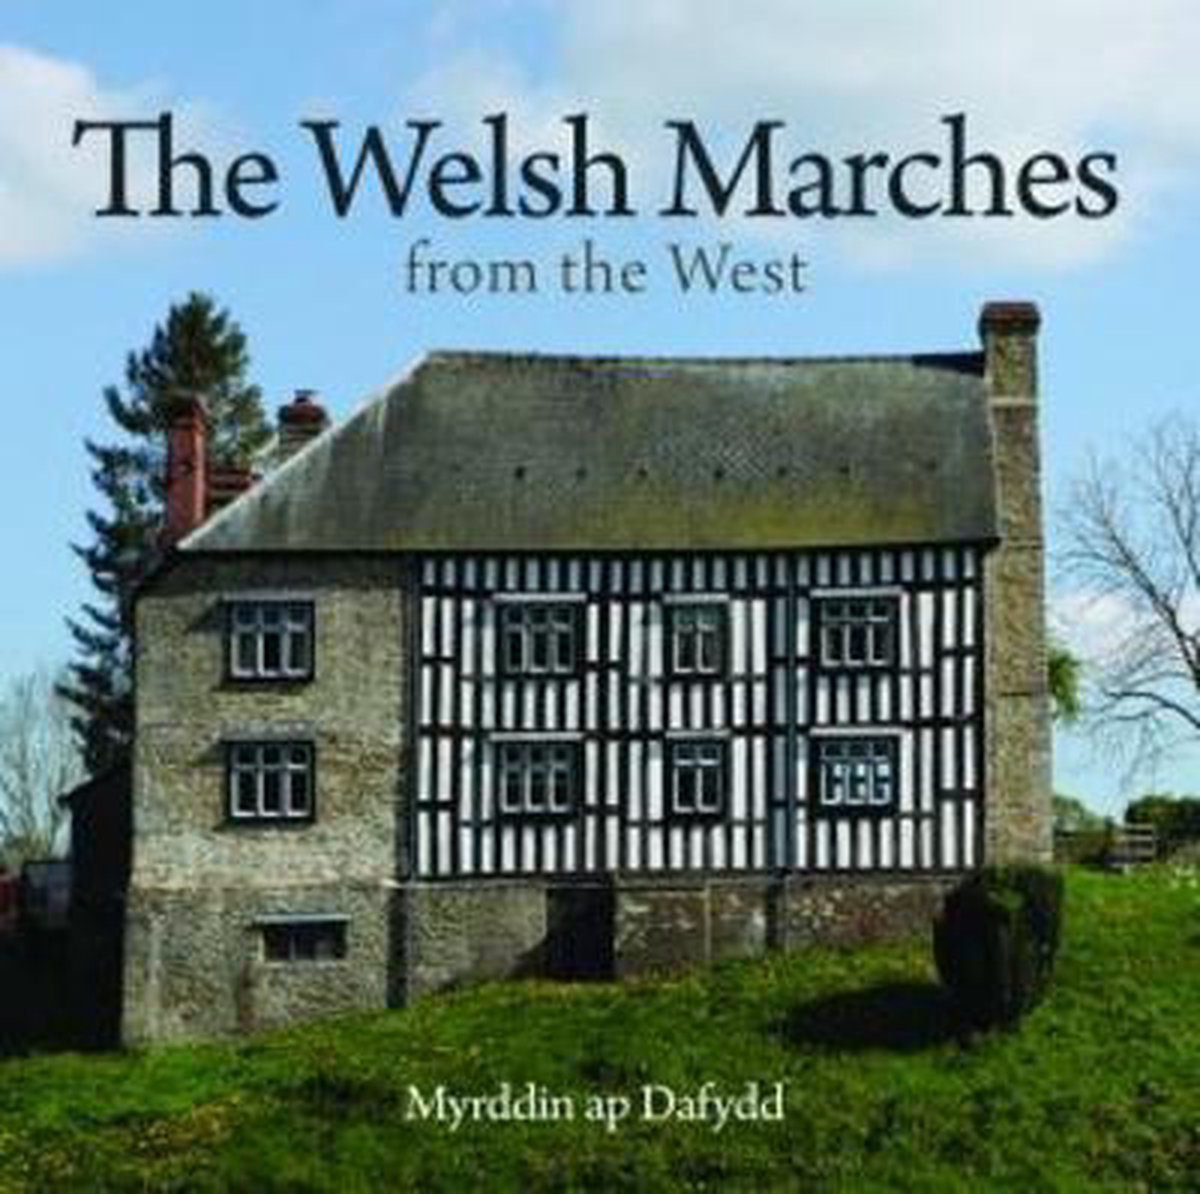 Compact Wales: Welsh Marches from the West, The - Myrddin Ap Dafydd